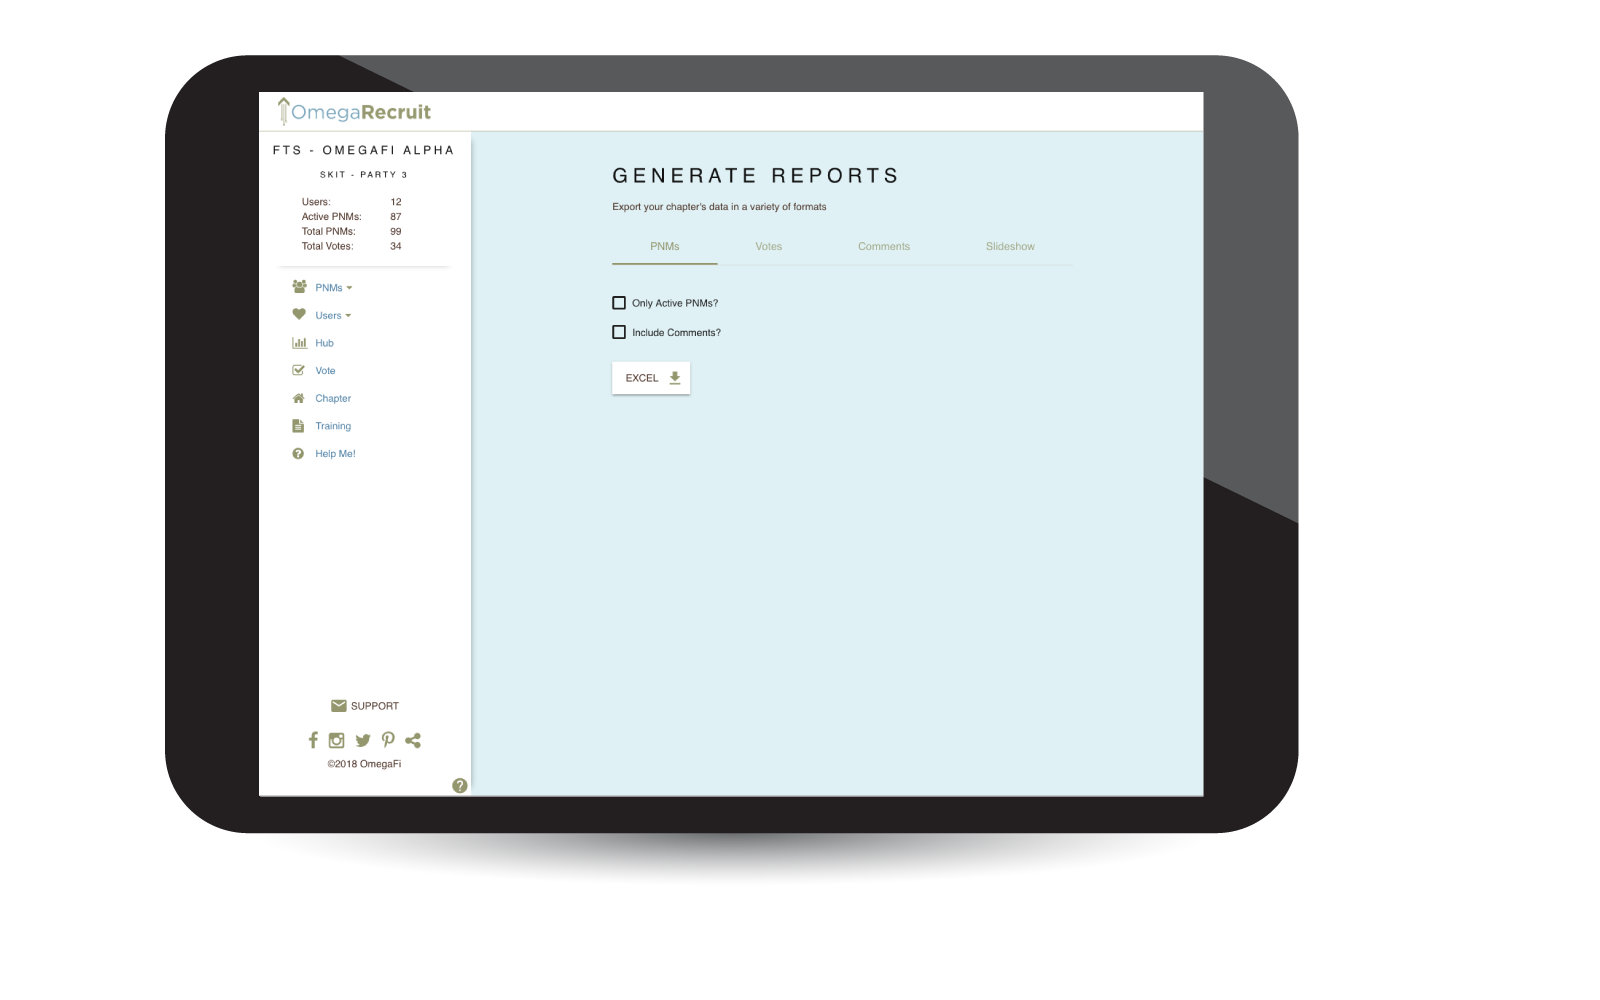 Get a better birds’ eye view of your rush process with reporting from sorority recruitment software.